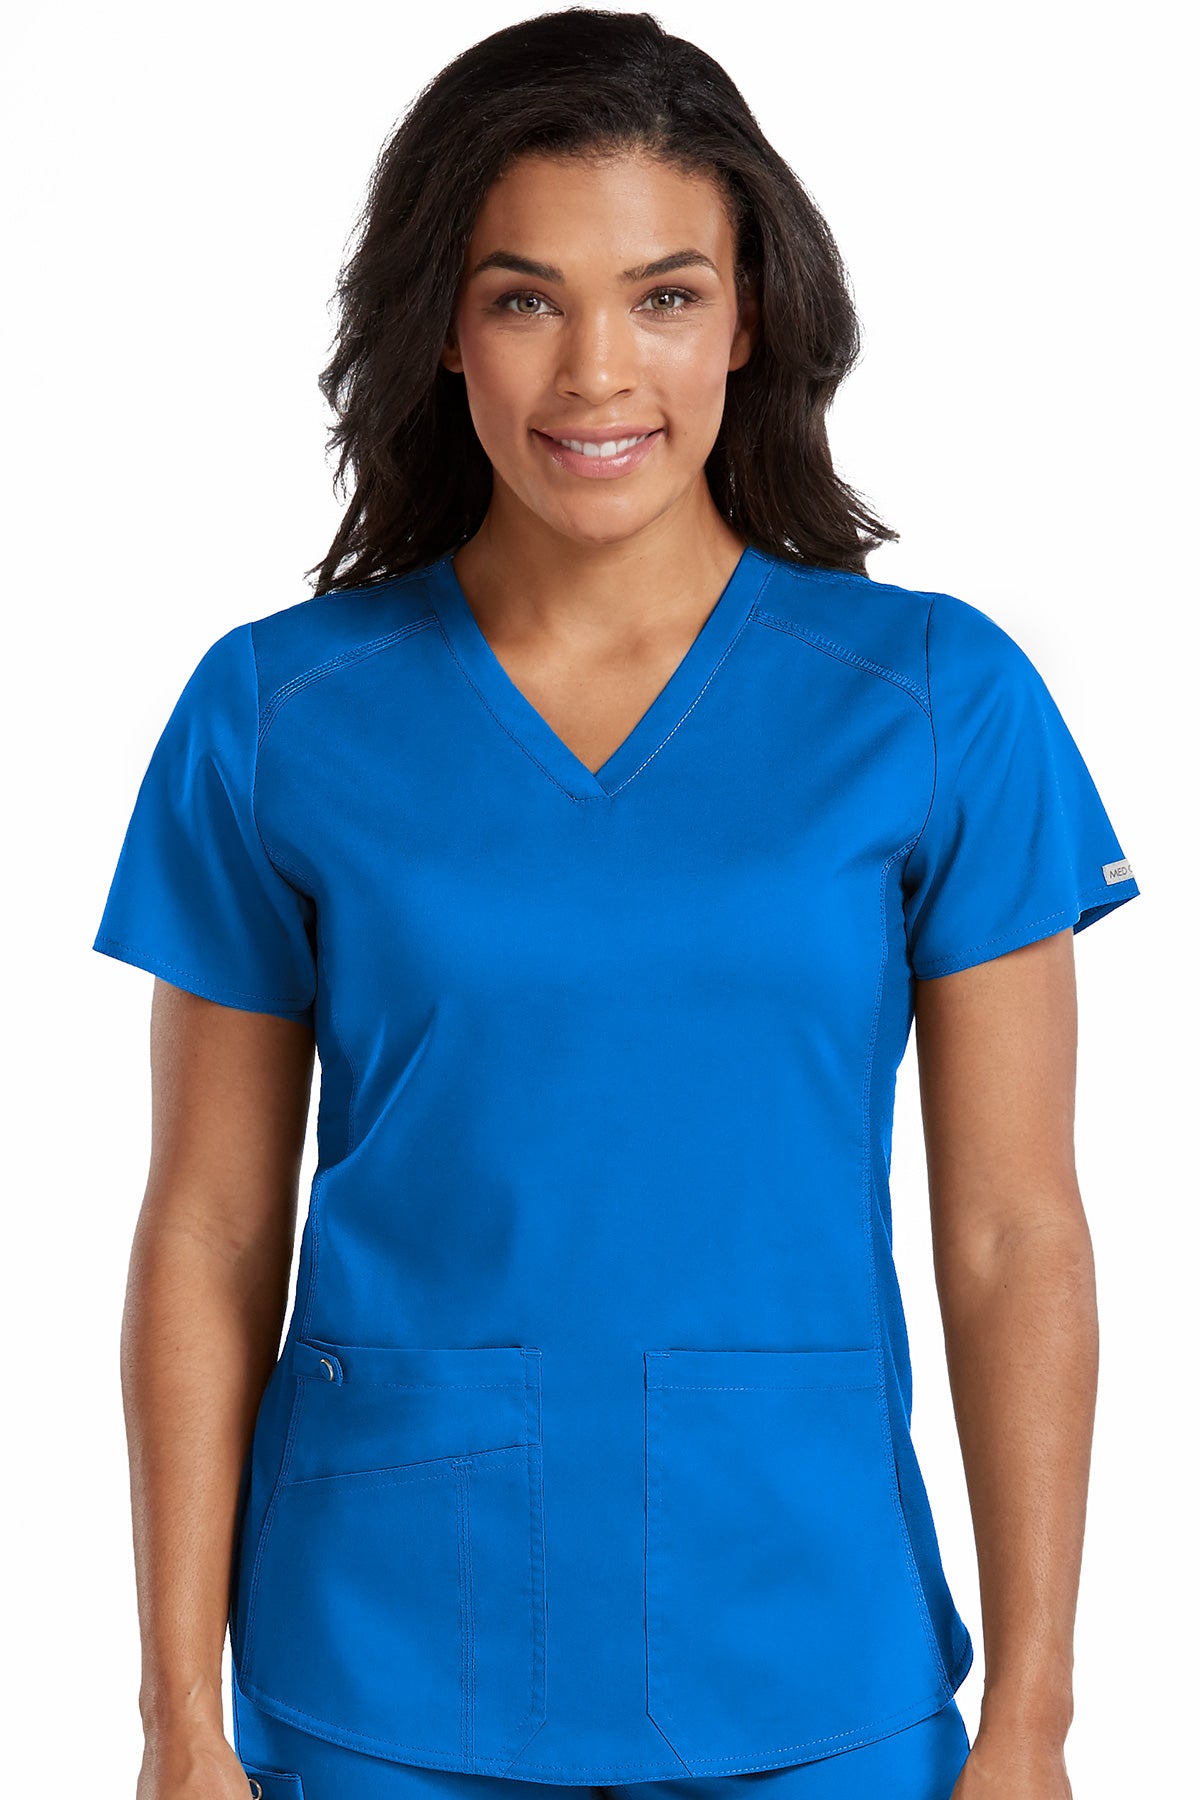 Med Couture V-Neck Shirttail Racerback Top XS-3XL  / Royal